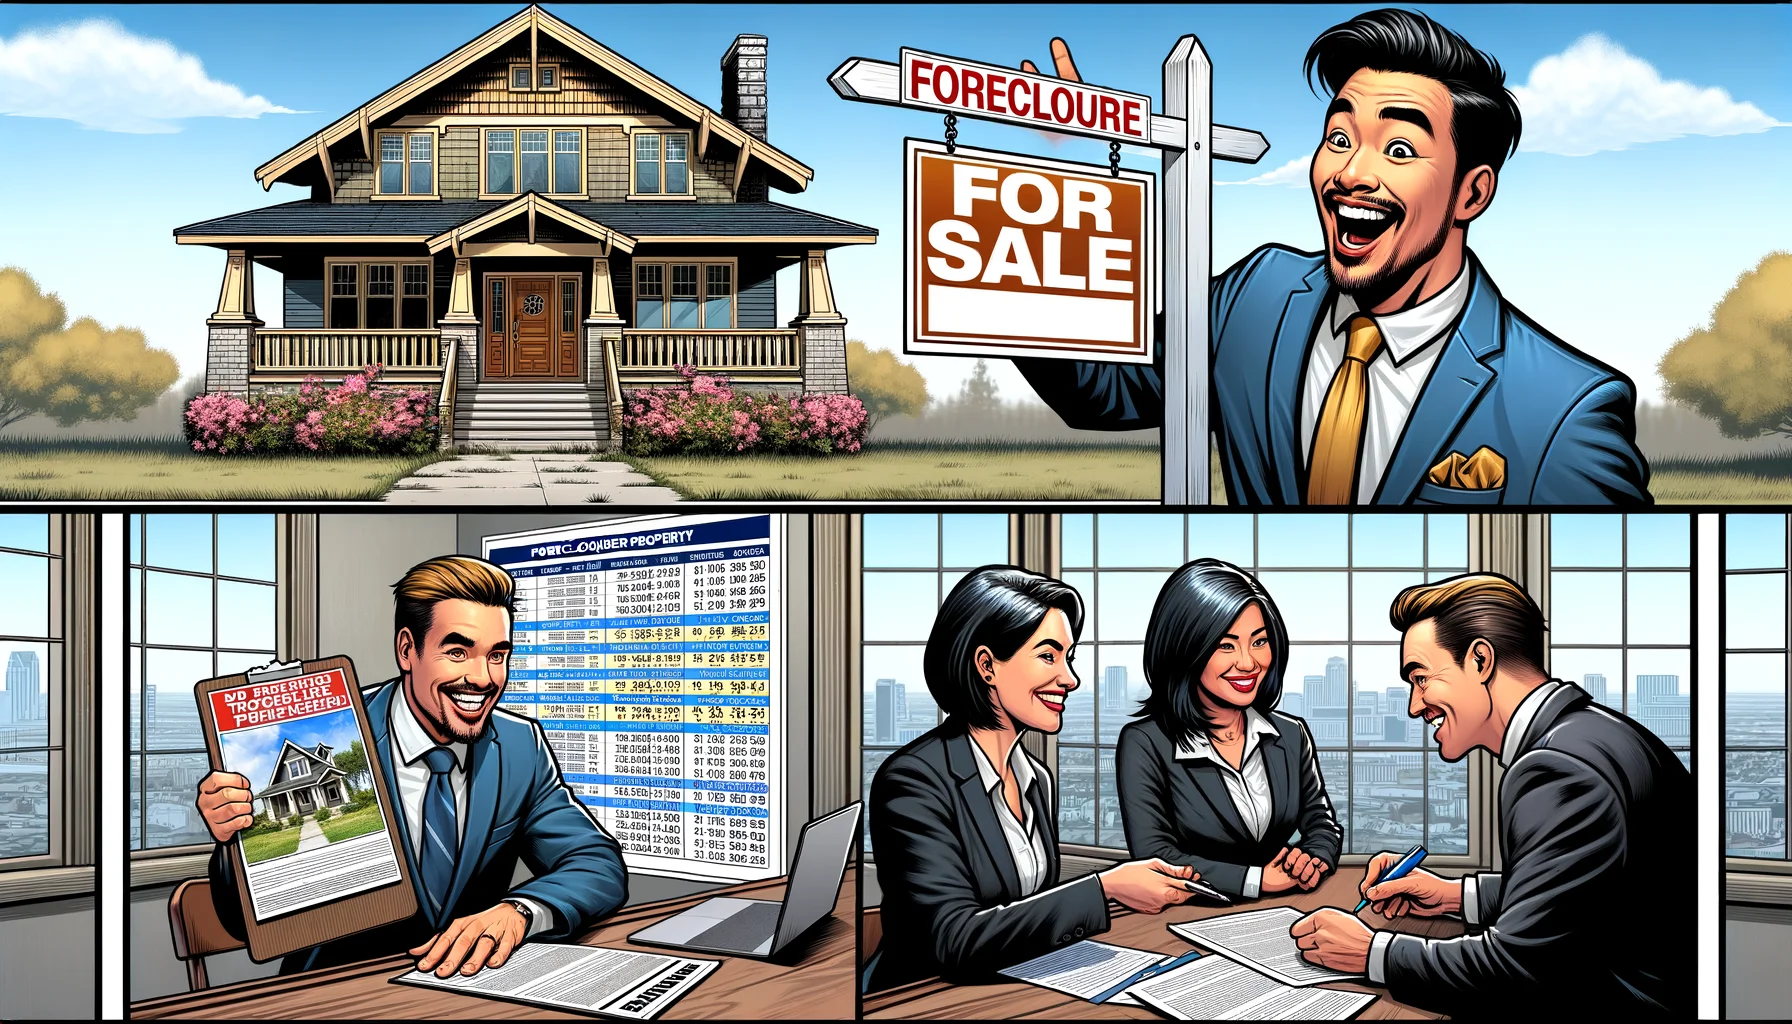 Generate a humorous and realistic image depicting a guide to buying a foreclosure property in a perfect scenario. Include the following scenes: 1) A potential buyer (an Asian man) with a broad smile, looking excited while finding an unanticipated 'For Sale' sign in front of a beautiful two-story, American craftsman style house, 2) A Latino woman real estate agent in a power suit showing the property, with spreadsheets in the background displaying the outstanding prices, 3) A satisfied buyer reviewing and signing the sales contract with a Caucasian male lawyer in a smart-casual attire. All the people are depicted in a lighthearted, joyous manner reflecting the positivity of the scenario.